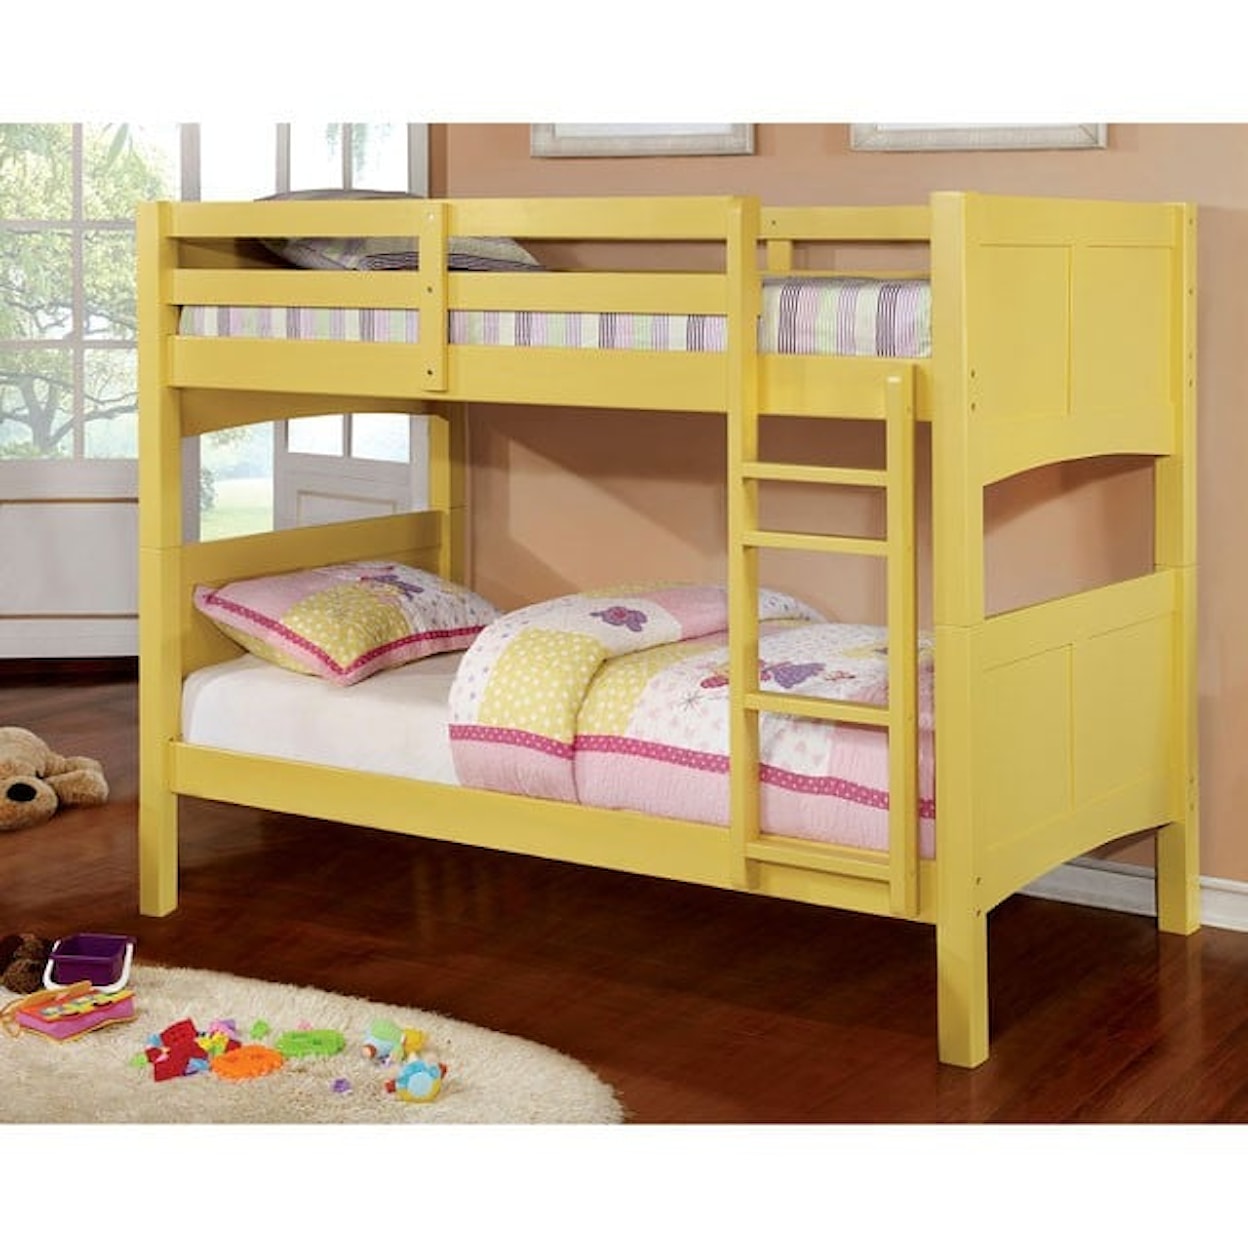 Furniture of America Prismo  Youth Bunk Bed with Ladder 